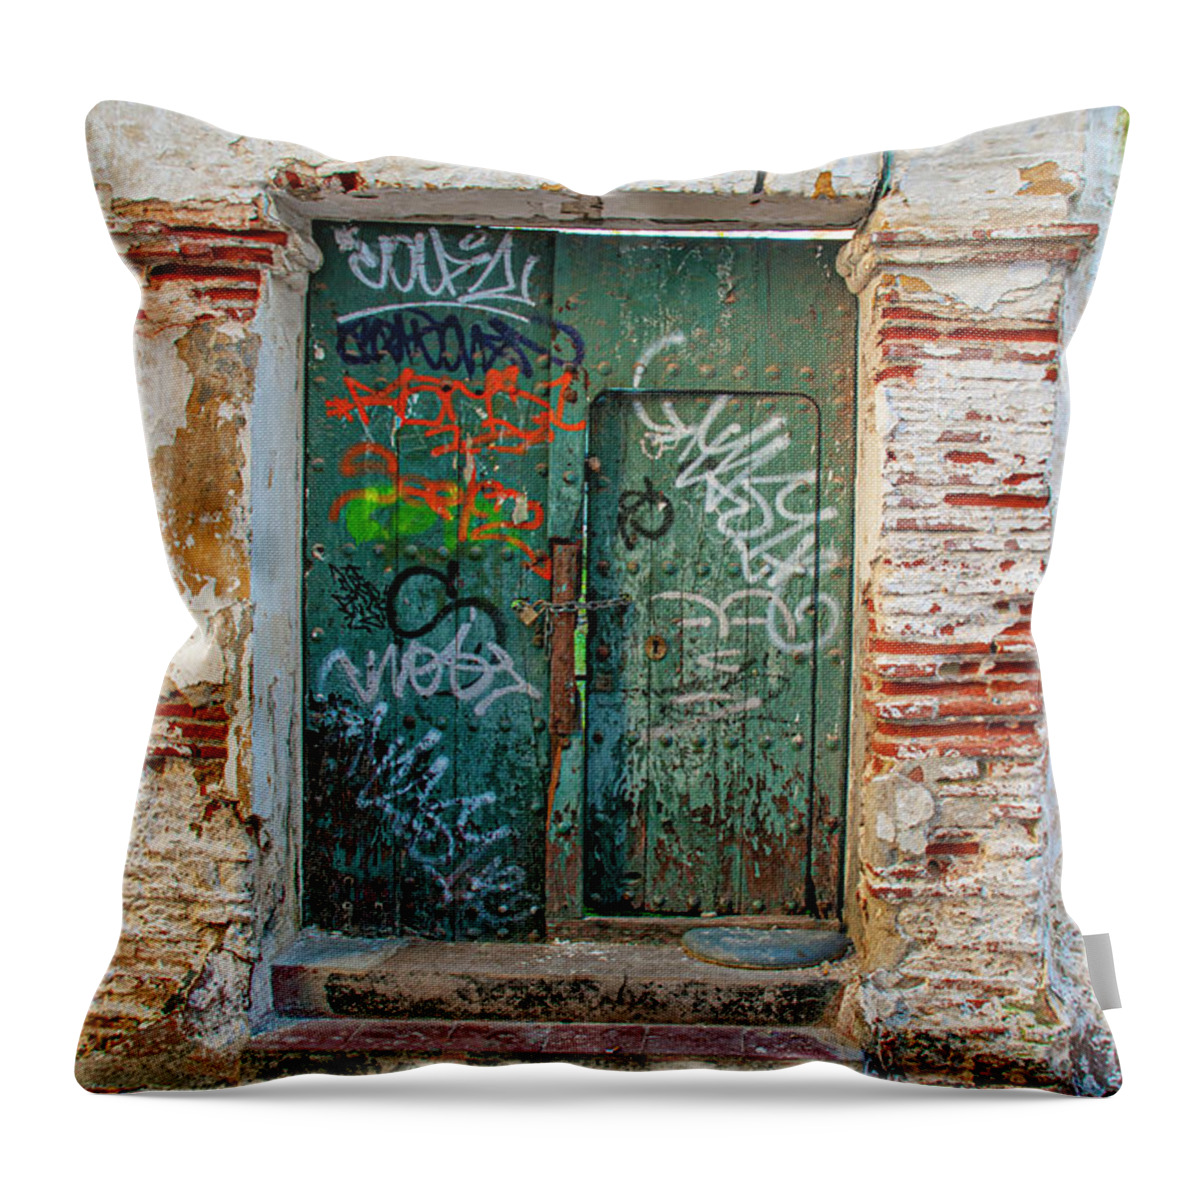 Green Throw Pillow featuring the photograph Green Graffiti Door by Denise Strahm